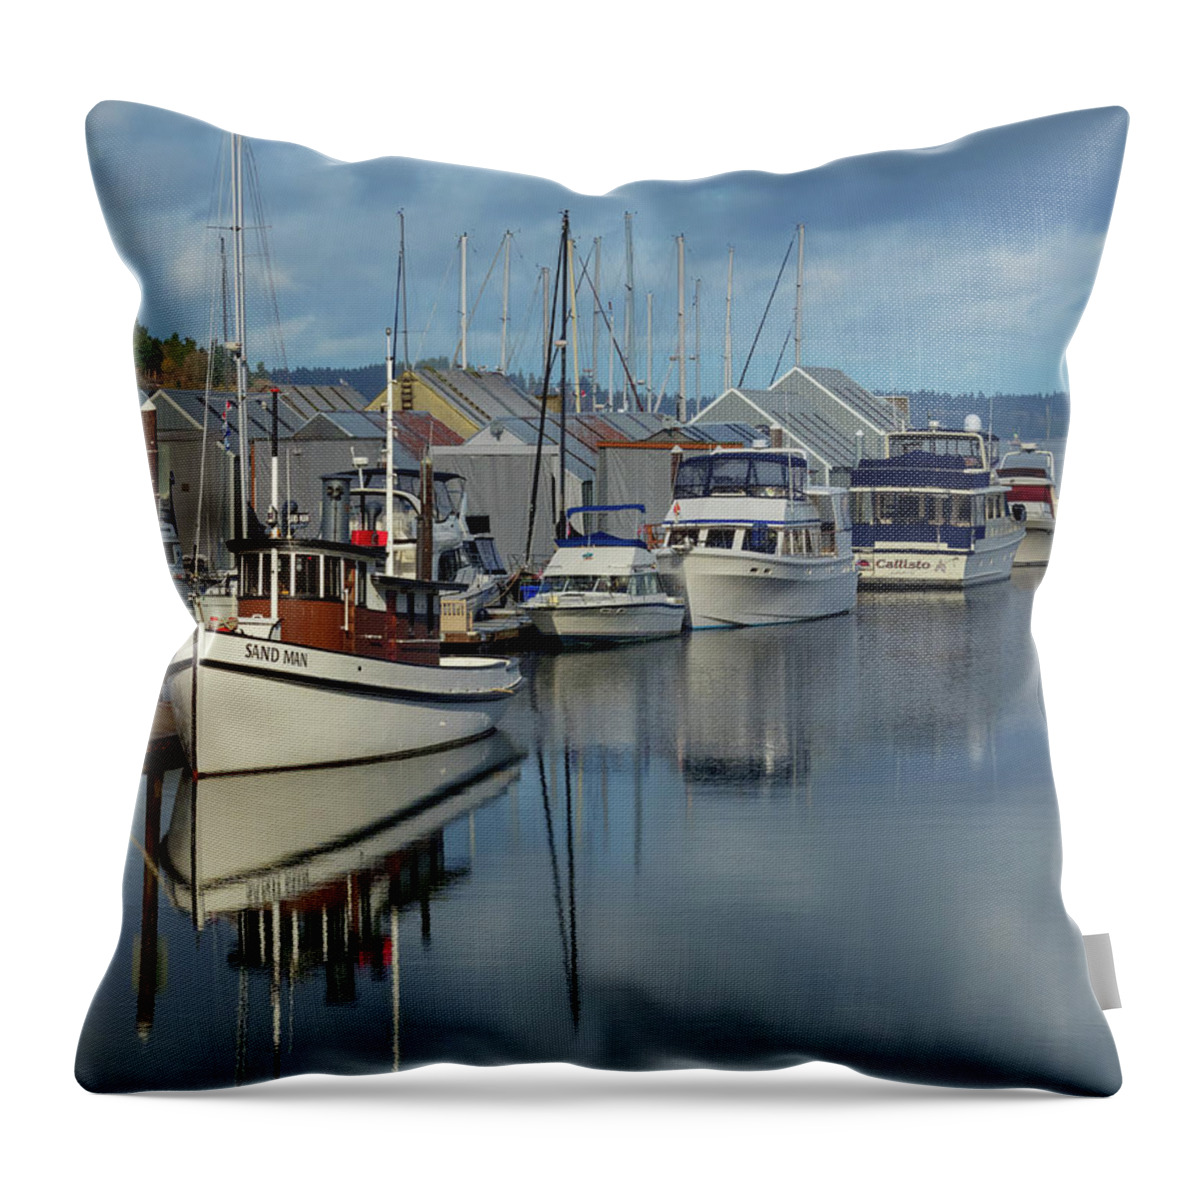 Sailboat Reflections Throw Pillow featuring the photograph Sailboat Reflection by Jean Noren